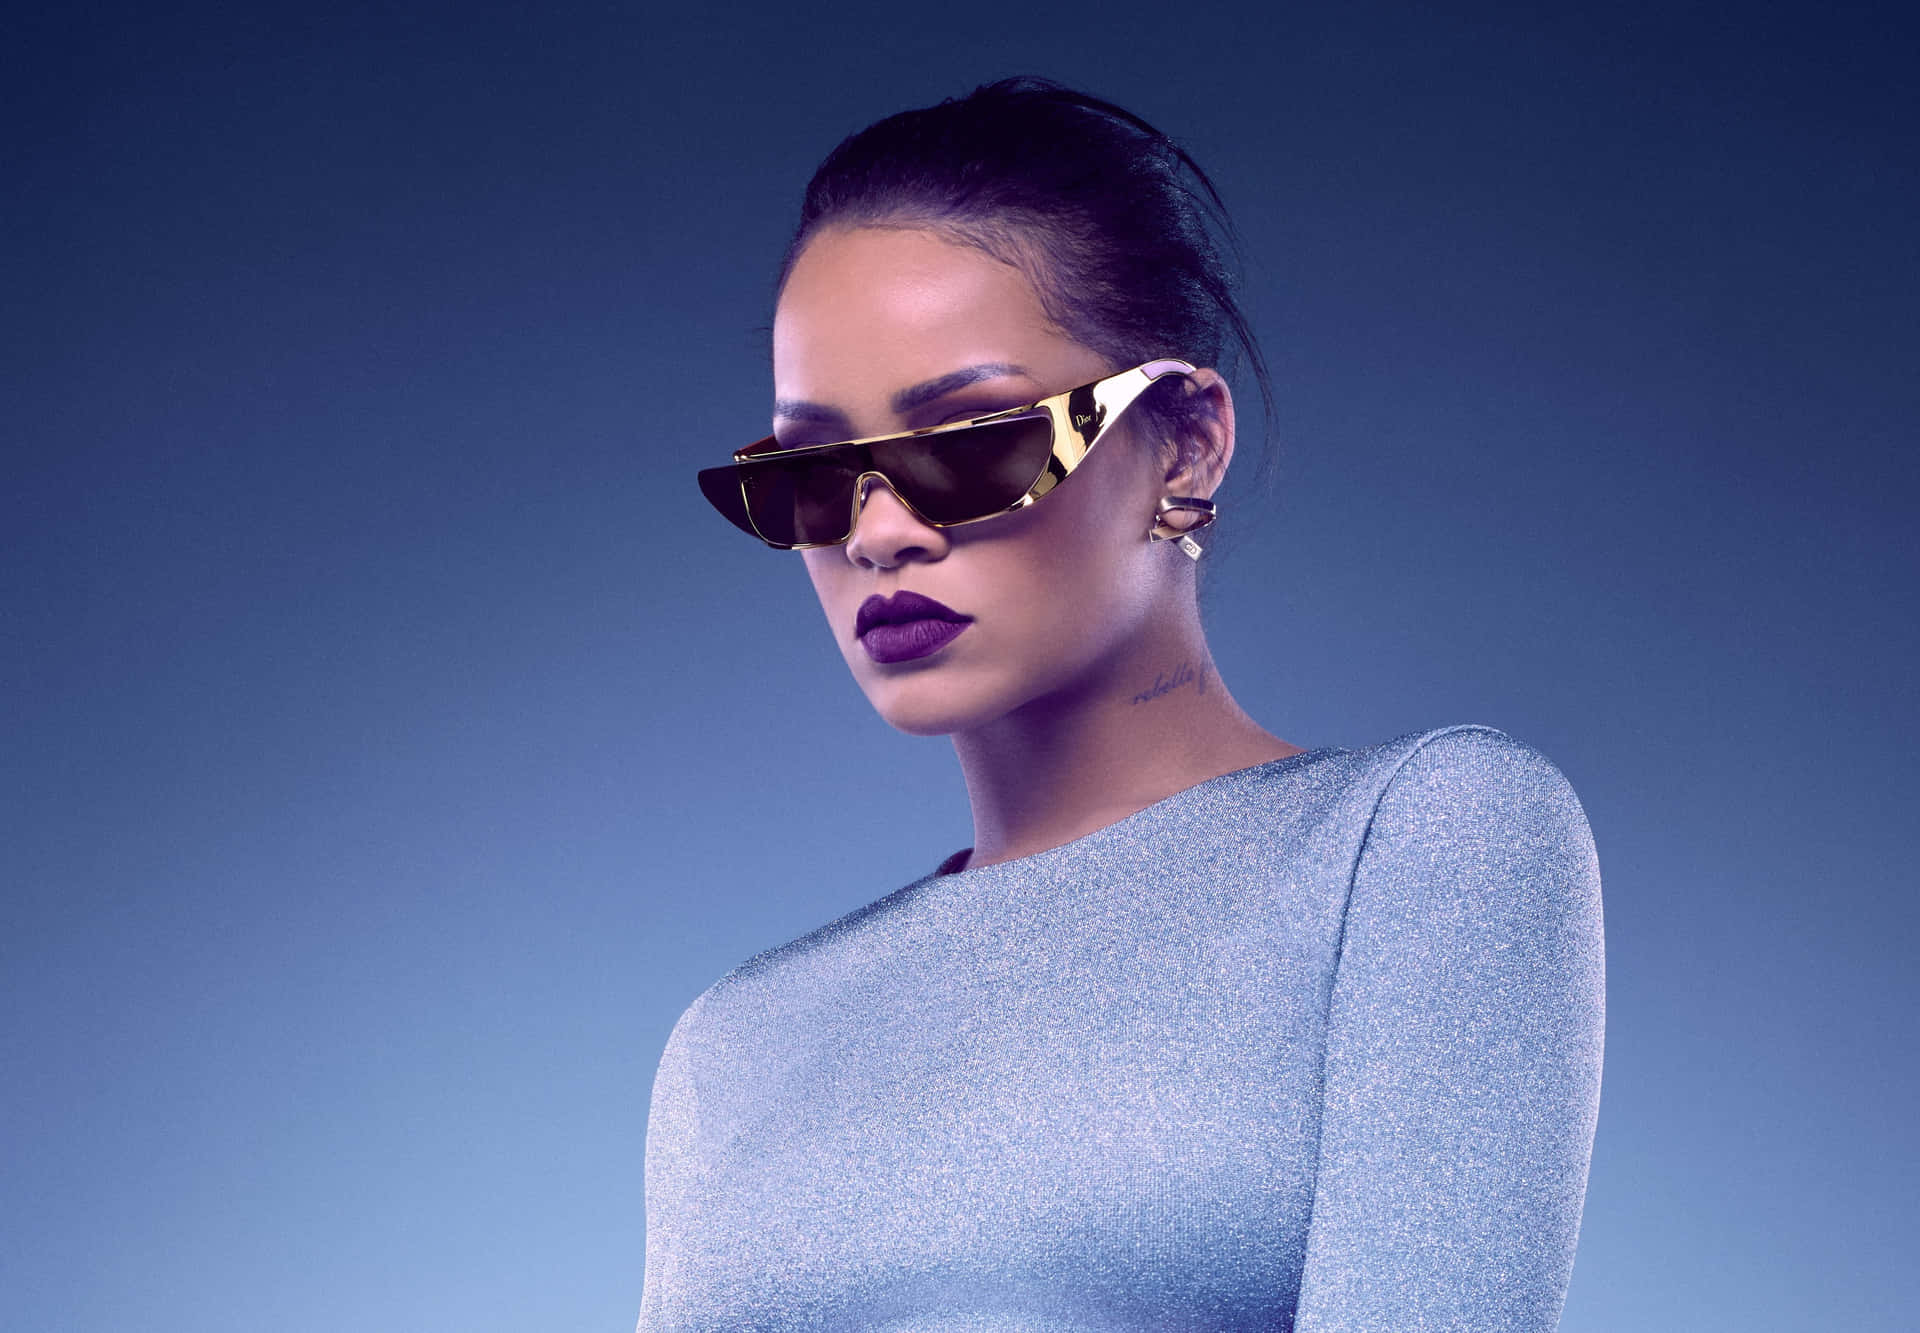 Rihanna showcases her glamour and style.